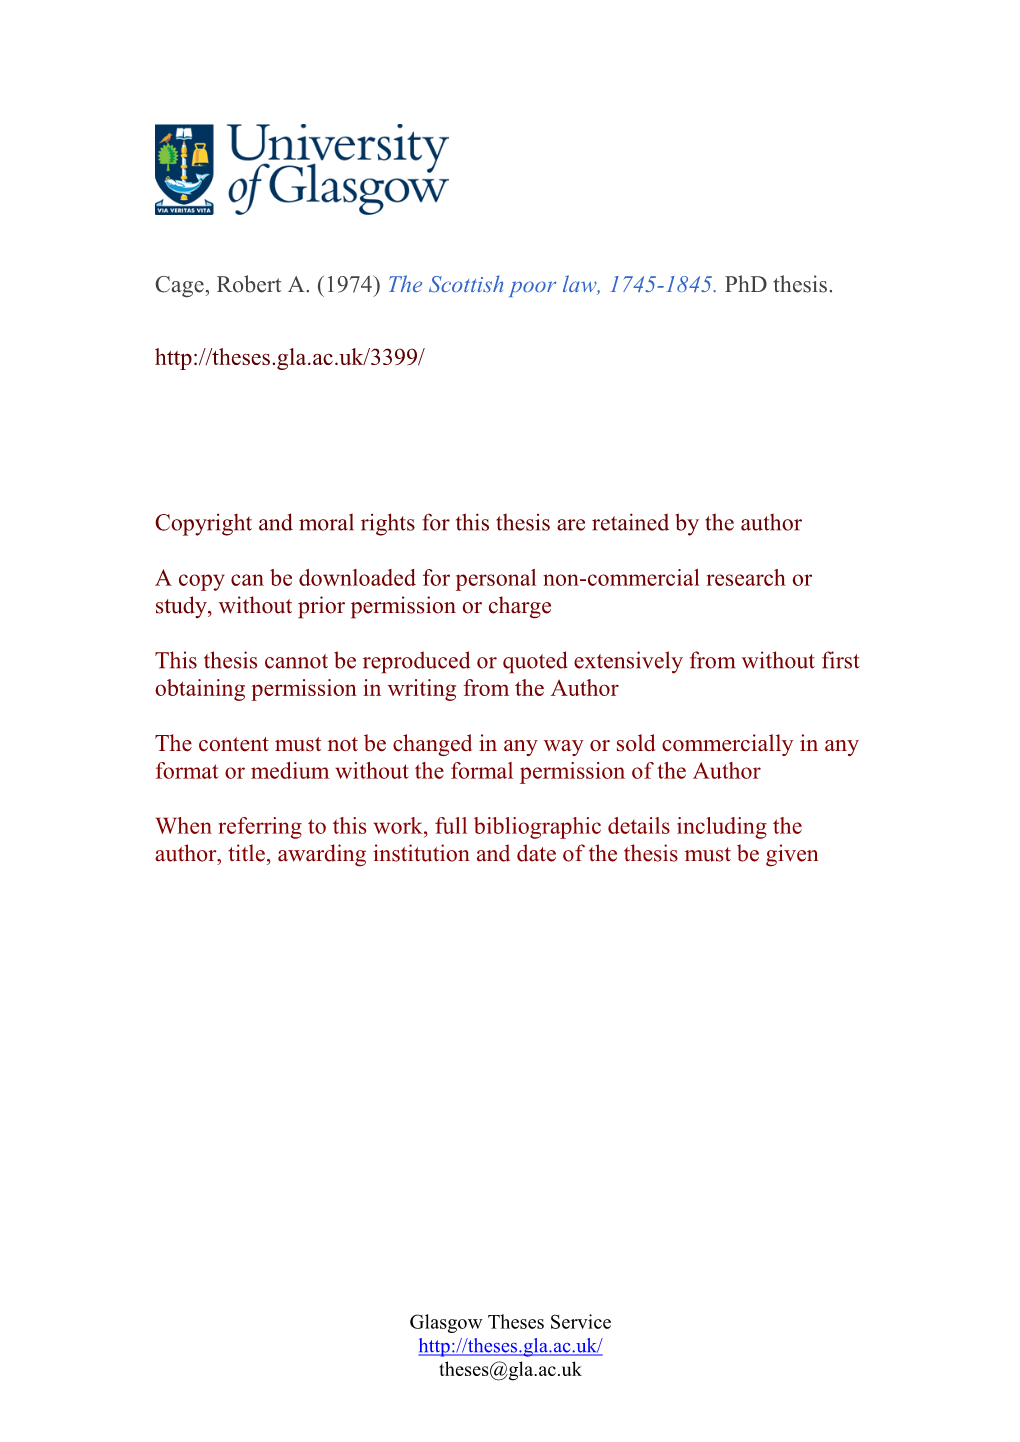 Cage, Robert A. (1974) the Scottish Poor Law, 1745-1845. Phd Thesis. Copyright and Moral Rights Fo